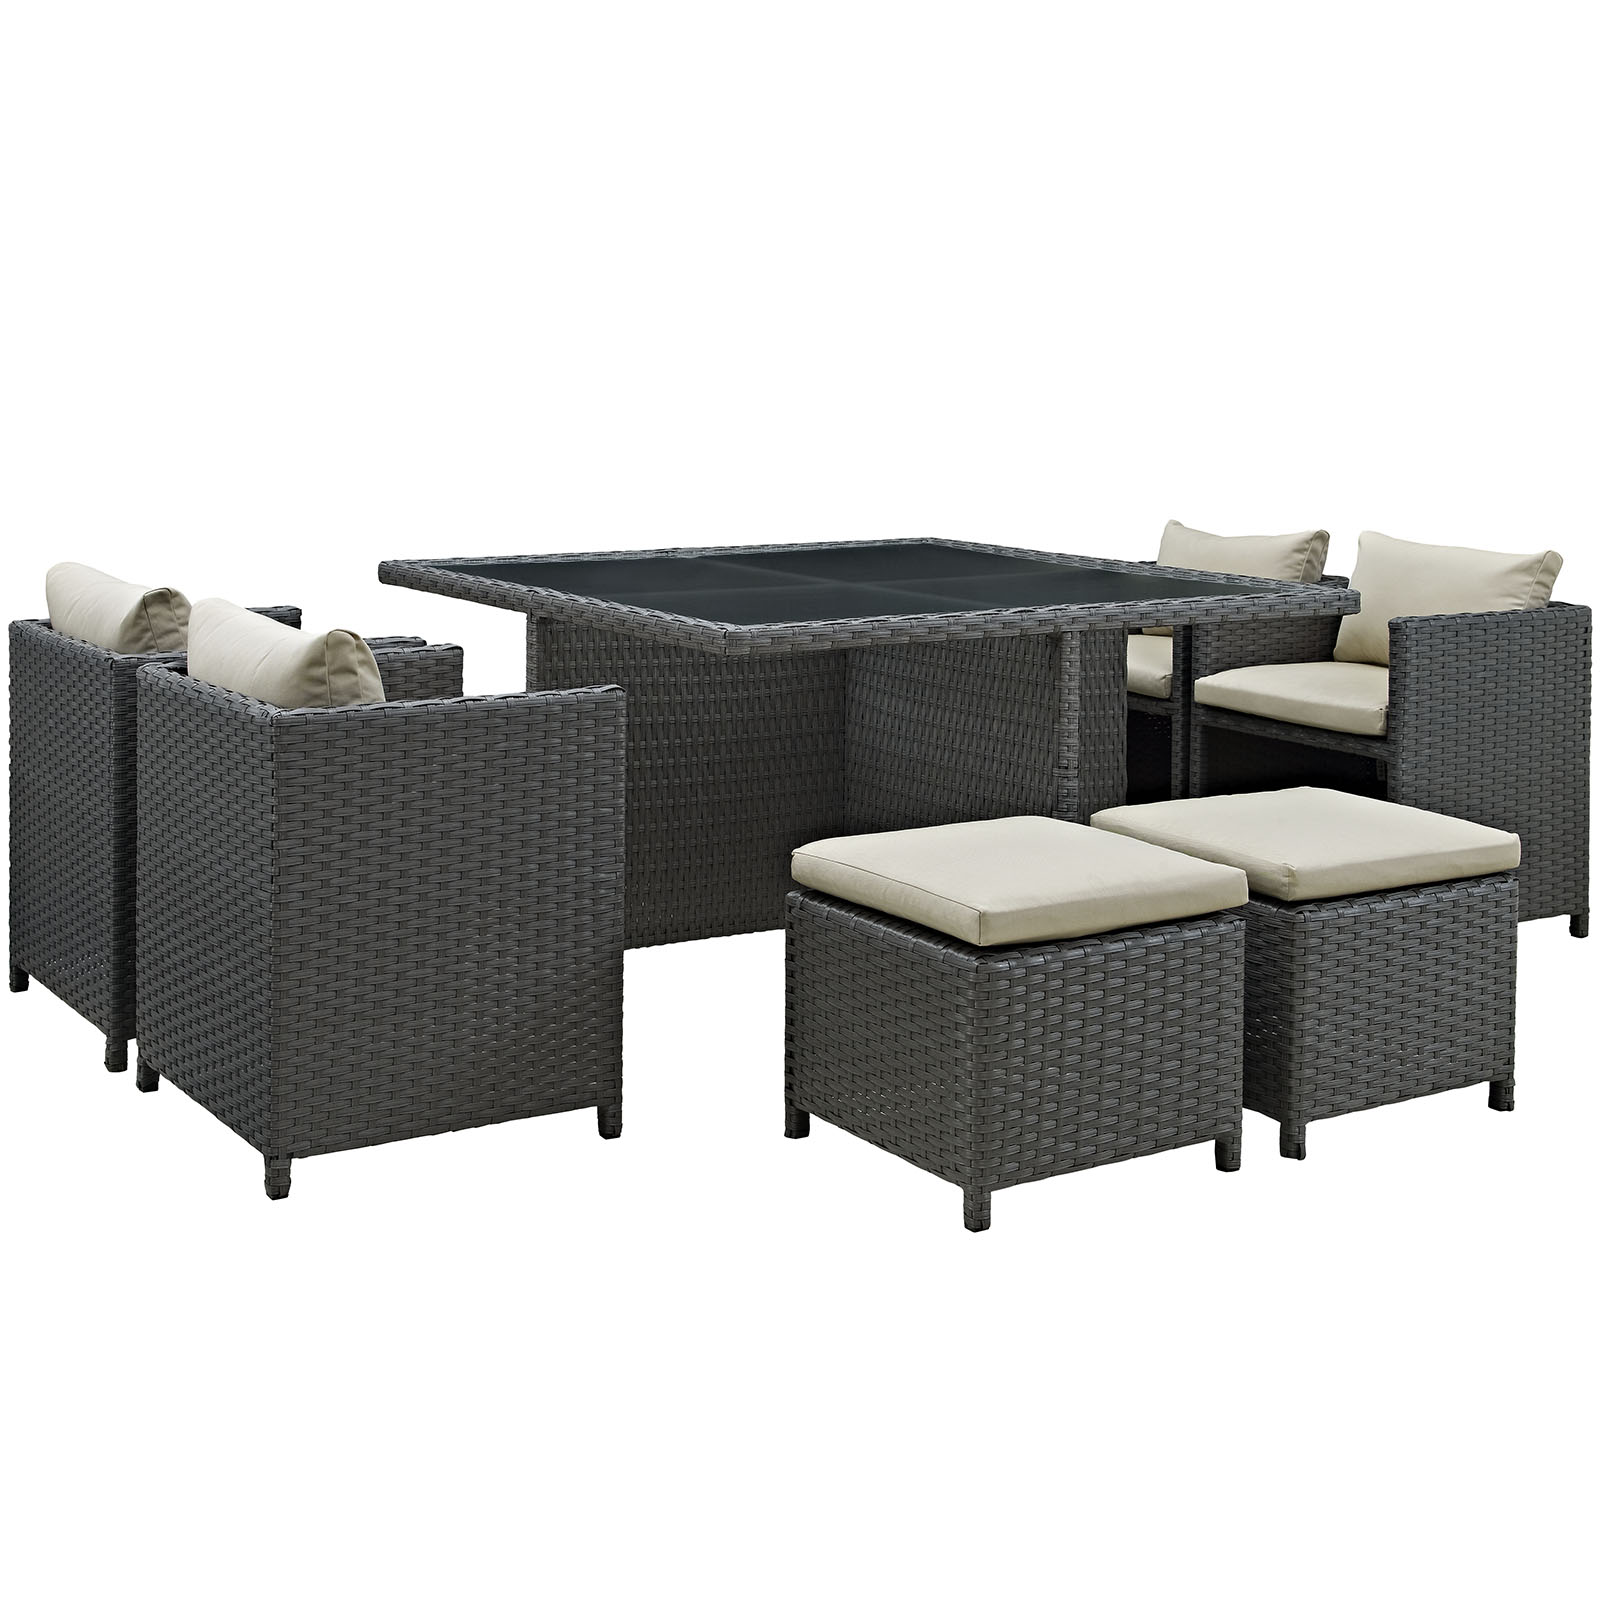 Modway Sojourn 9 Piece Outdoor Patio Sunbrella® Dining Set in Antique Canvas Beige - image 2 of 5